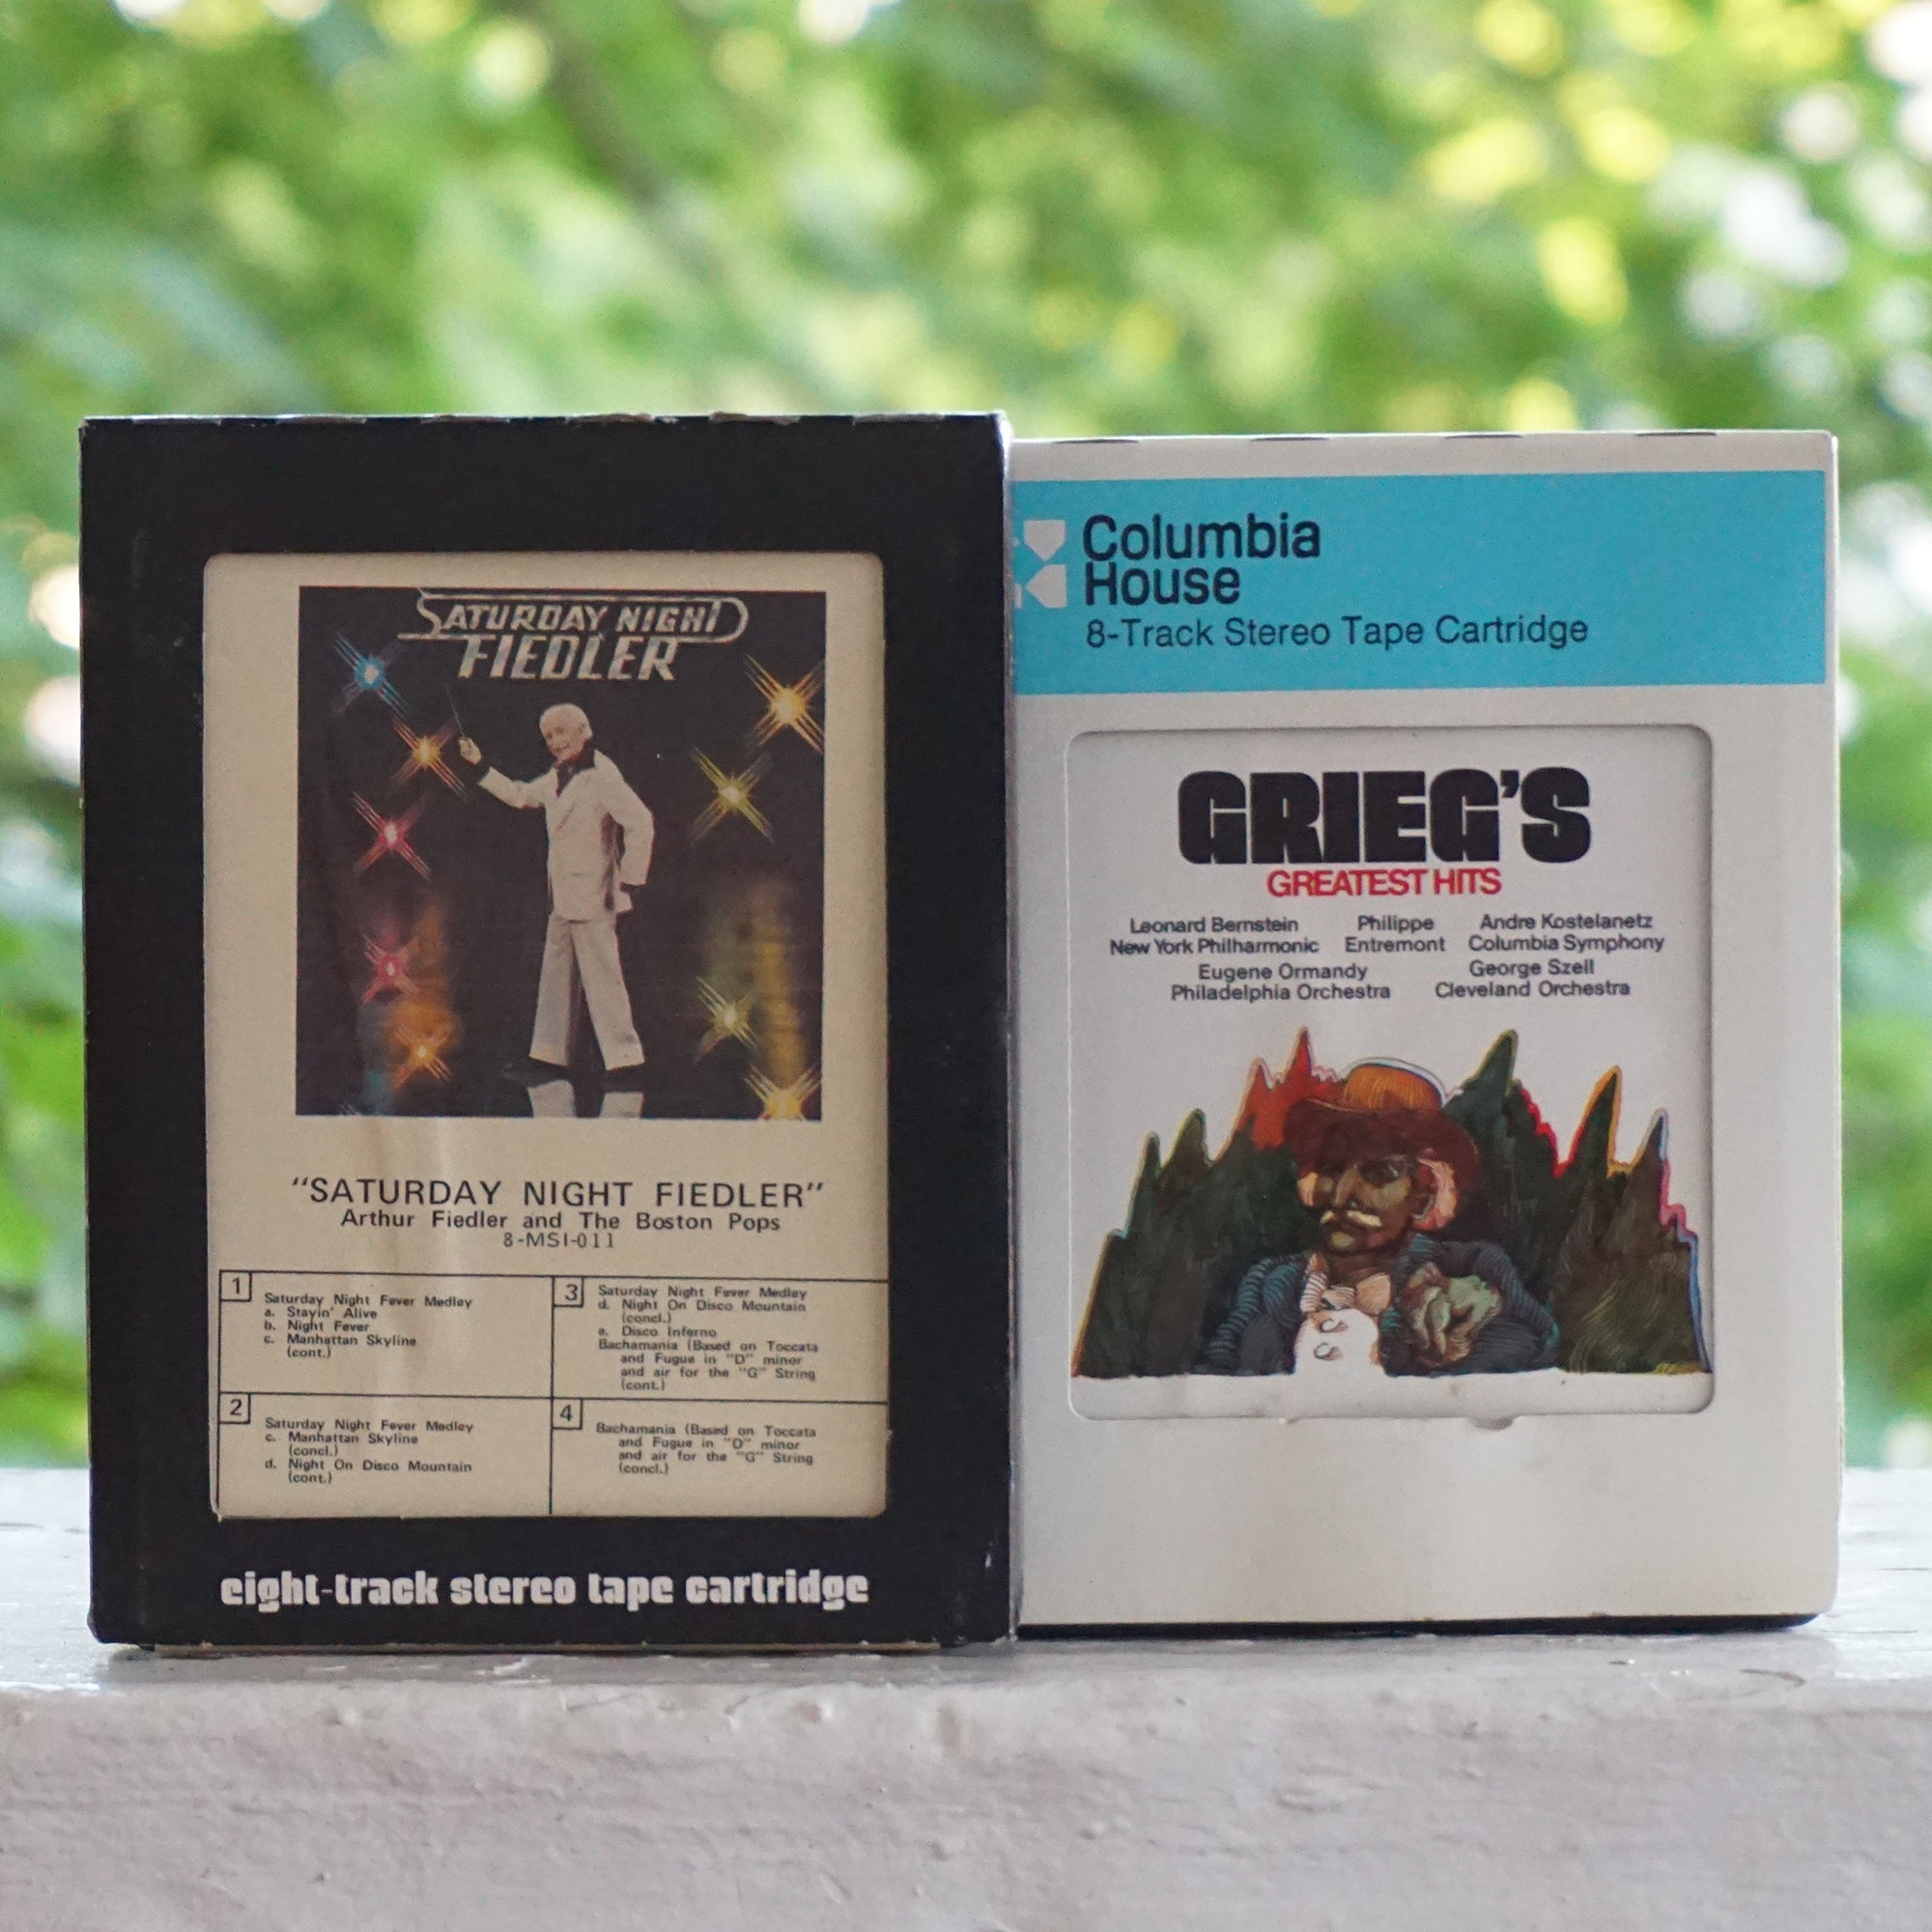 1970s Lot of 2 x 8-Track Stereo Tape Cartridges: Saturday Night Fiedler, Grieg's Greatest Hits